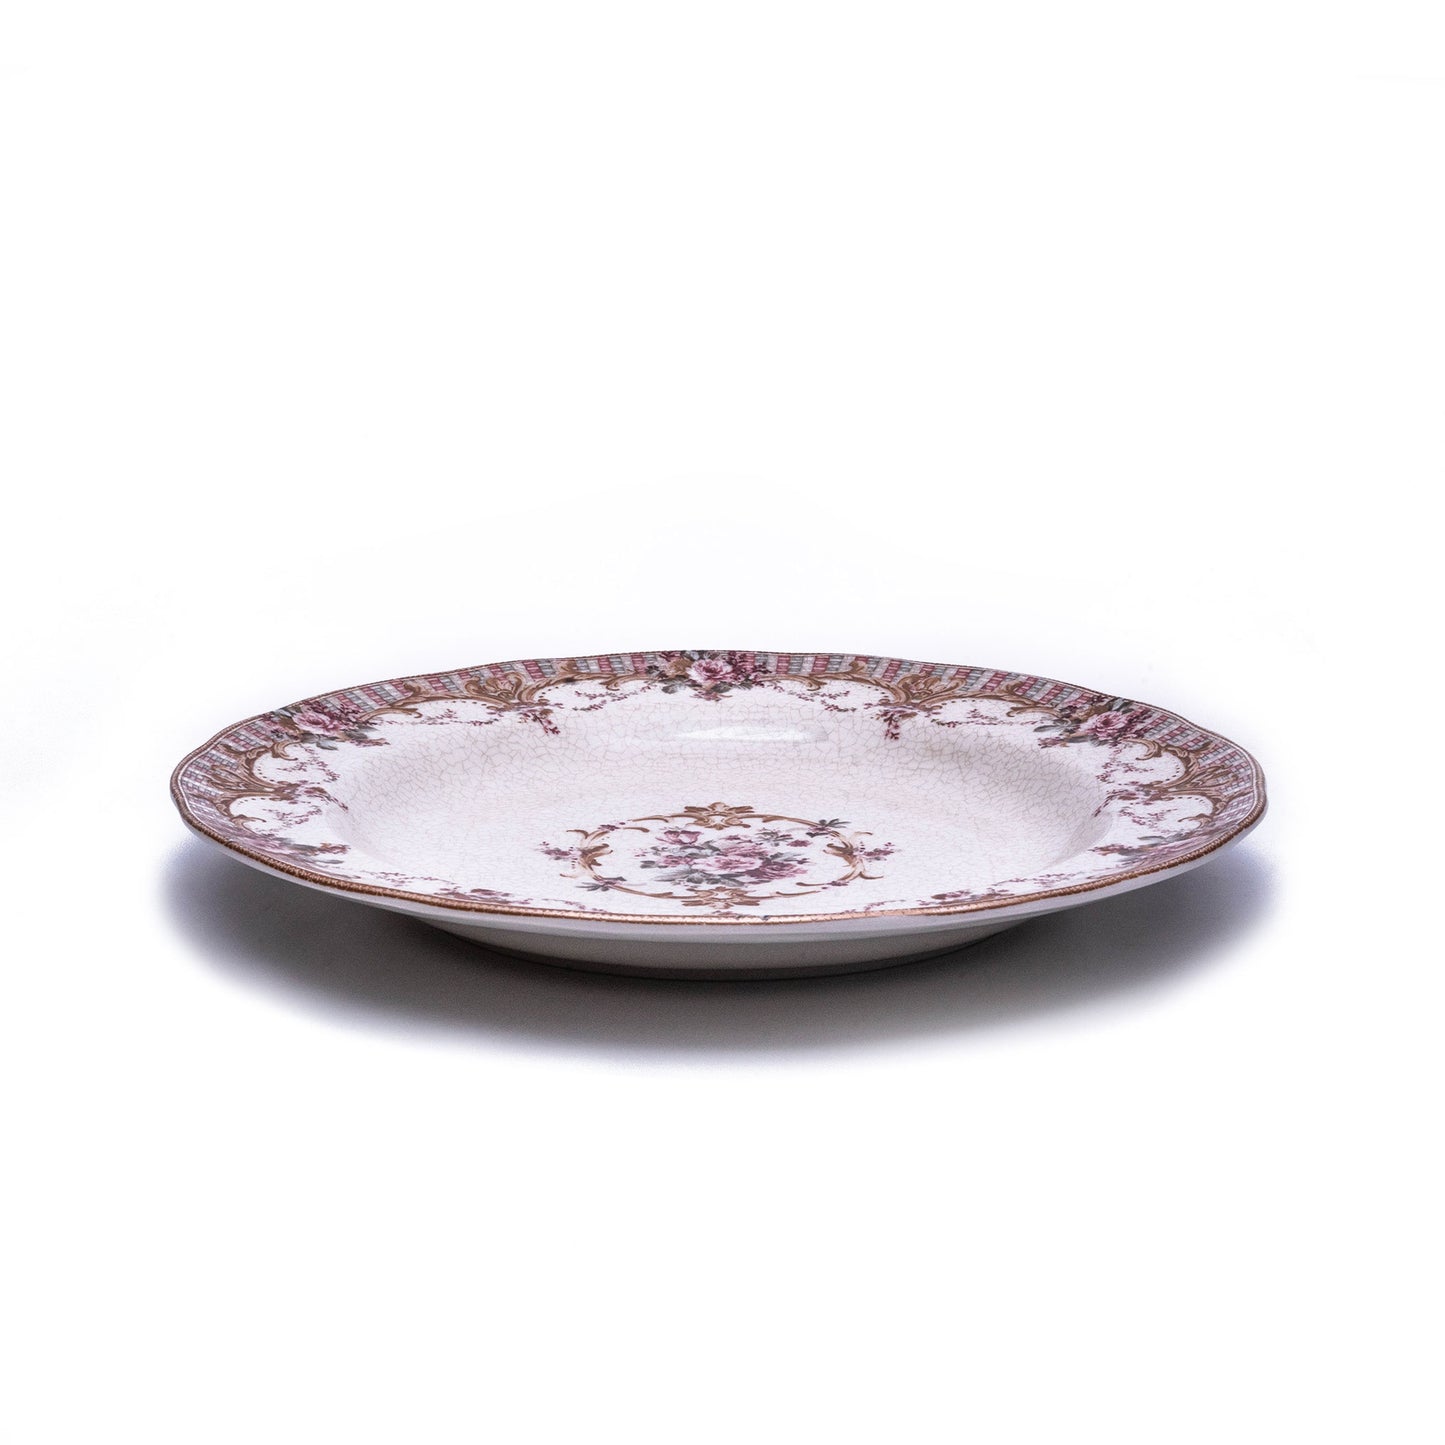 12" Round Chipped Rock Pattern Charger Plate - Flowers